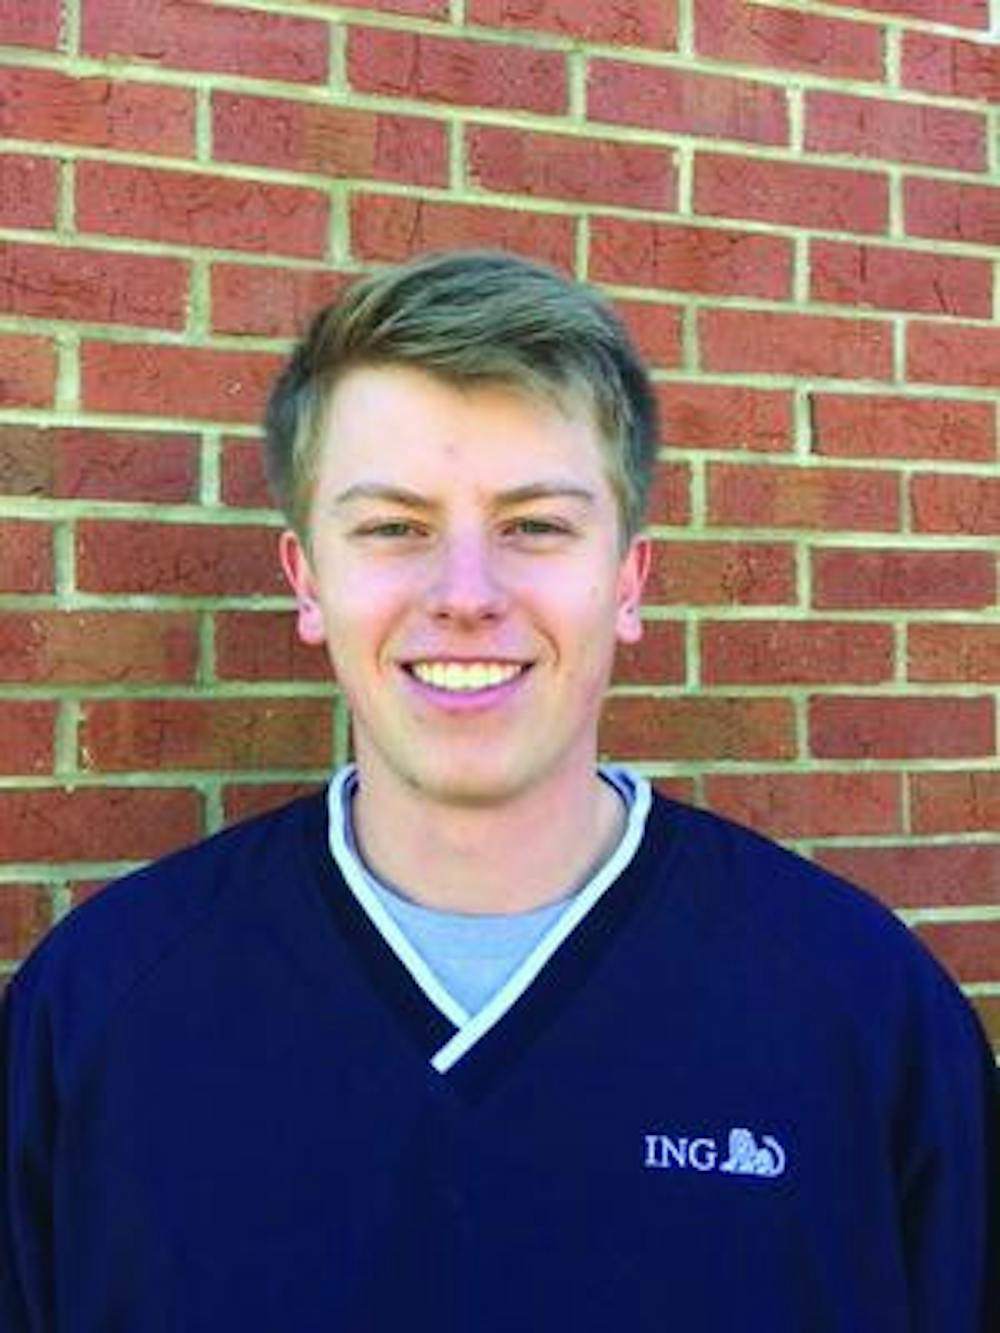 William Teischmann, a men’s lacrosse team player, speaks about his New Year’s resolution.